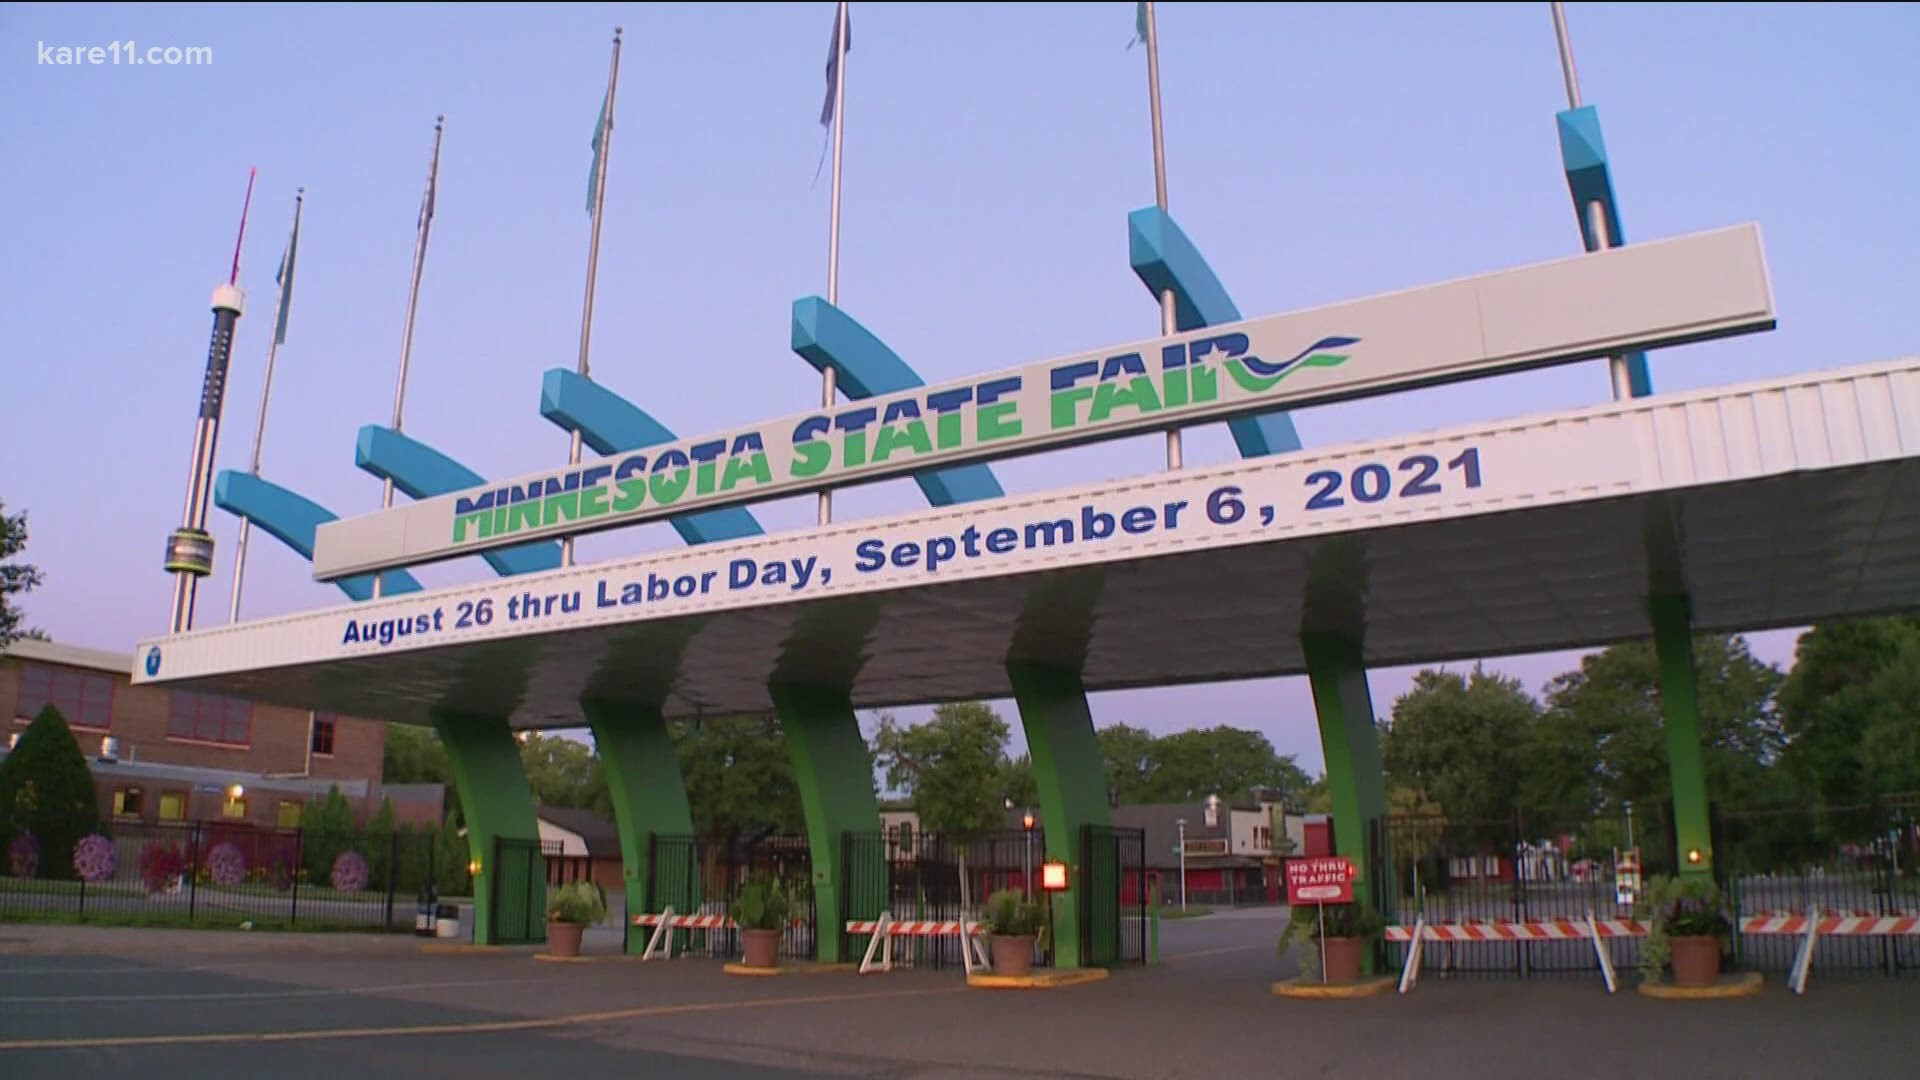 The Minnesota State Fair says it will need to find roughly 200 officers per day to appropriately monitor and safeguard the fairgrounds.